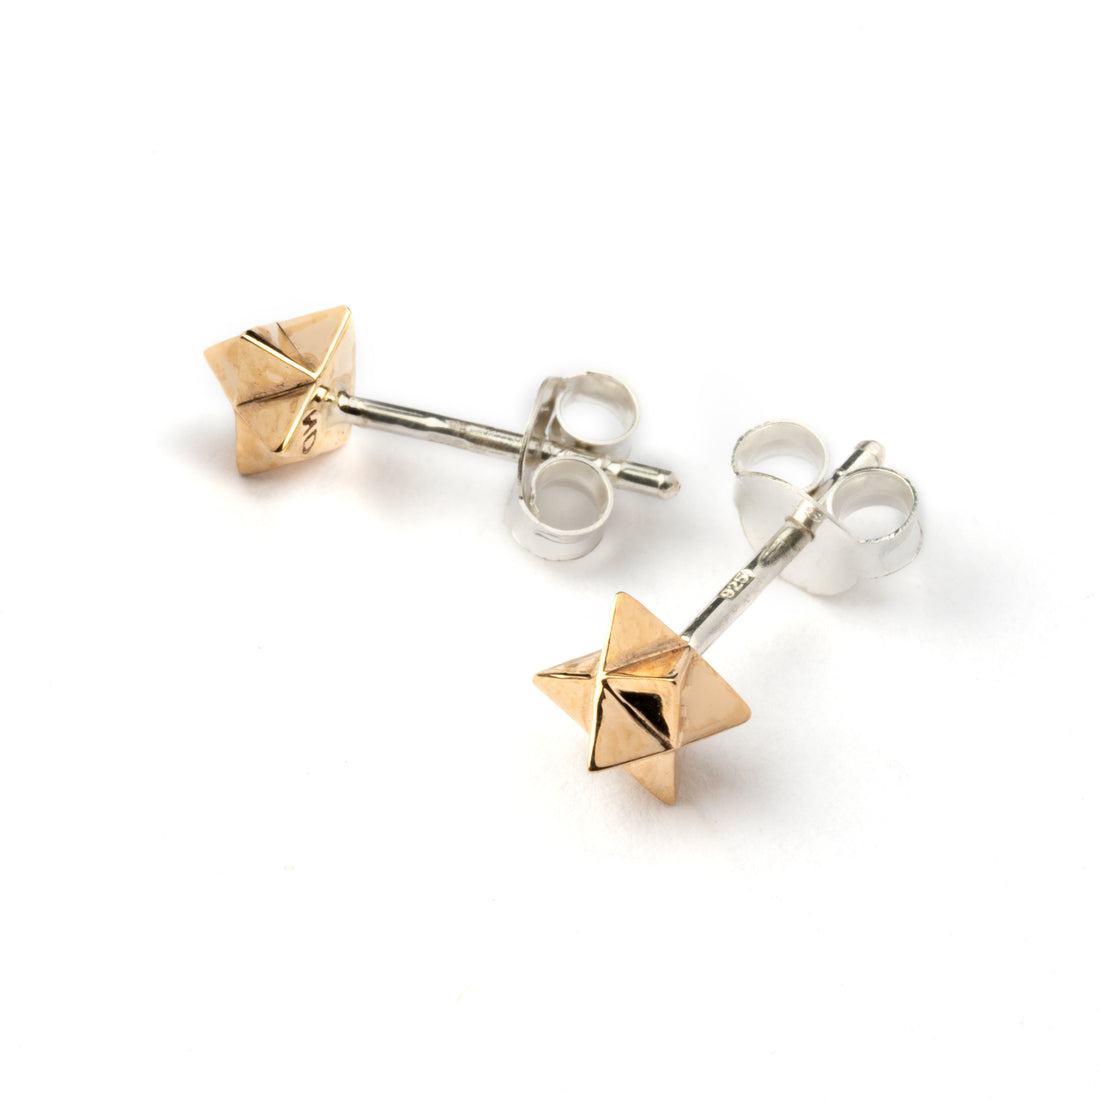 Bronze Merkaba Ear Studs front and side view